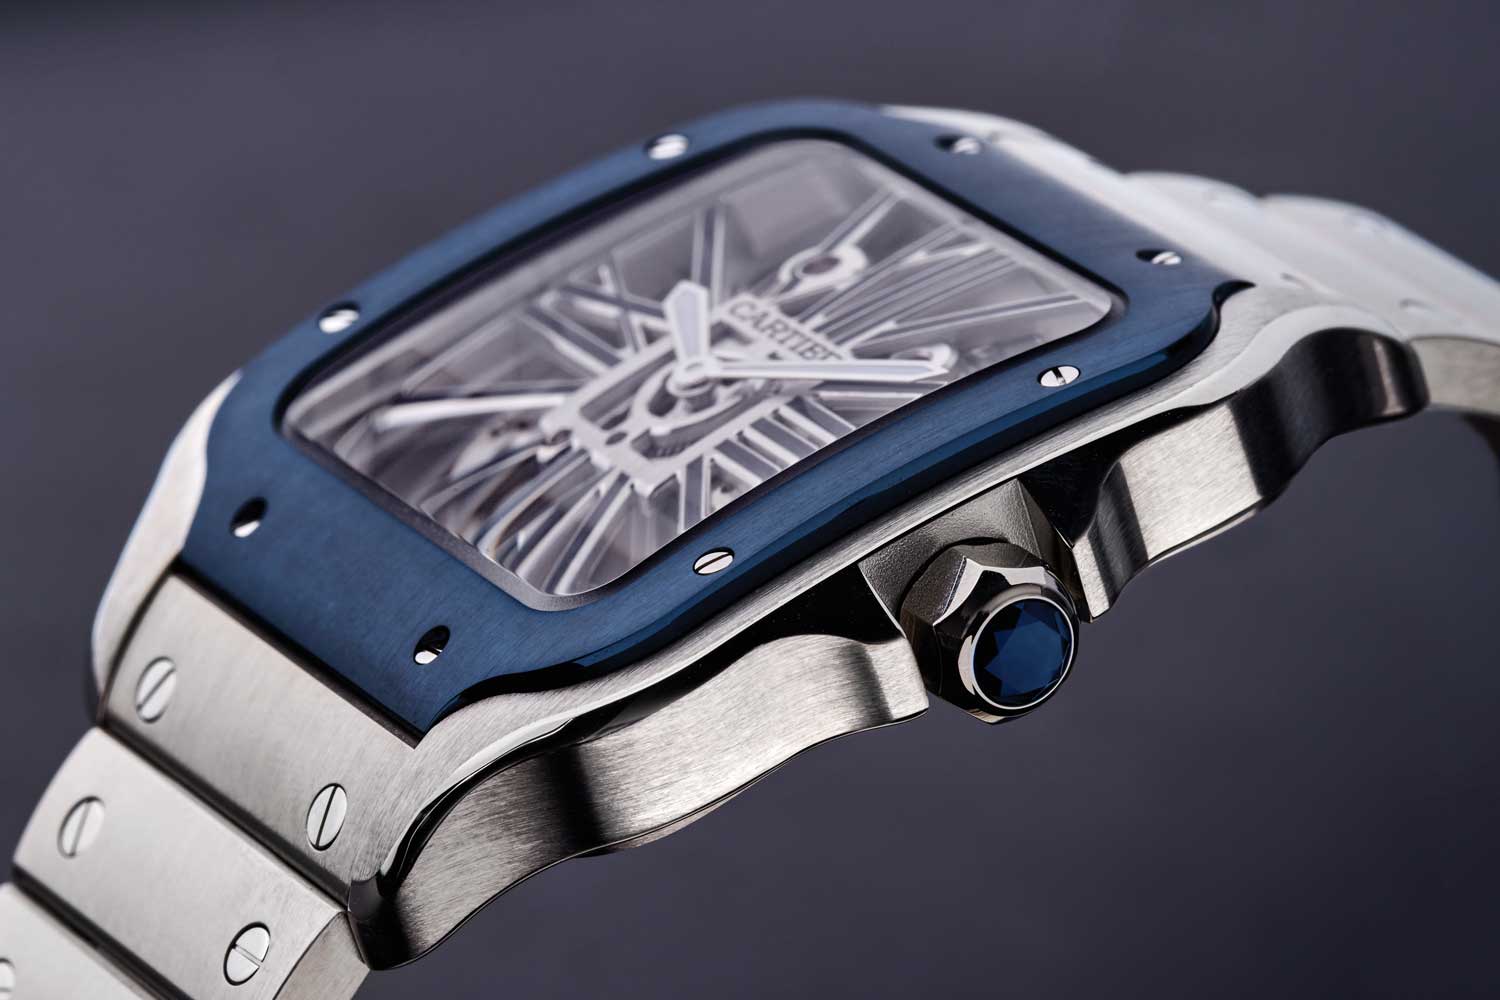 It isn’t just the skeleton caliber, it’s the refined case ergonomics that makes this Santos sing